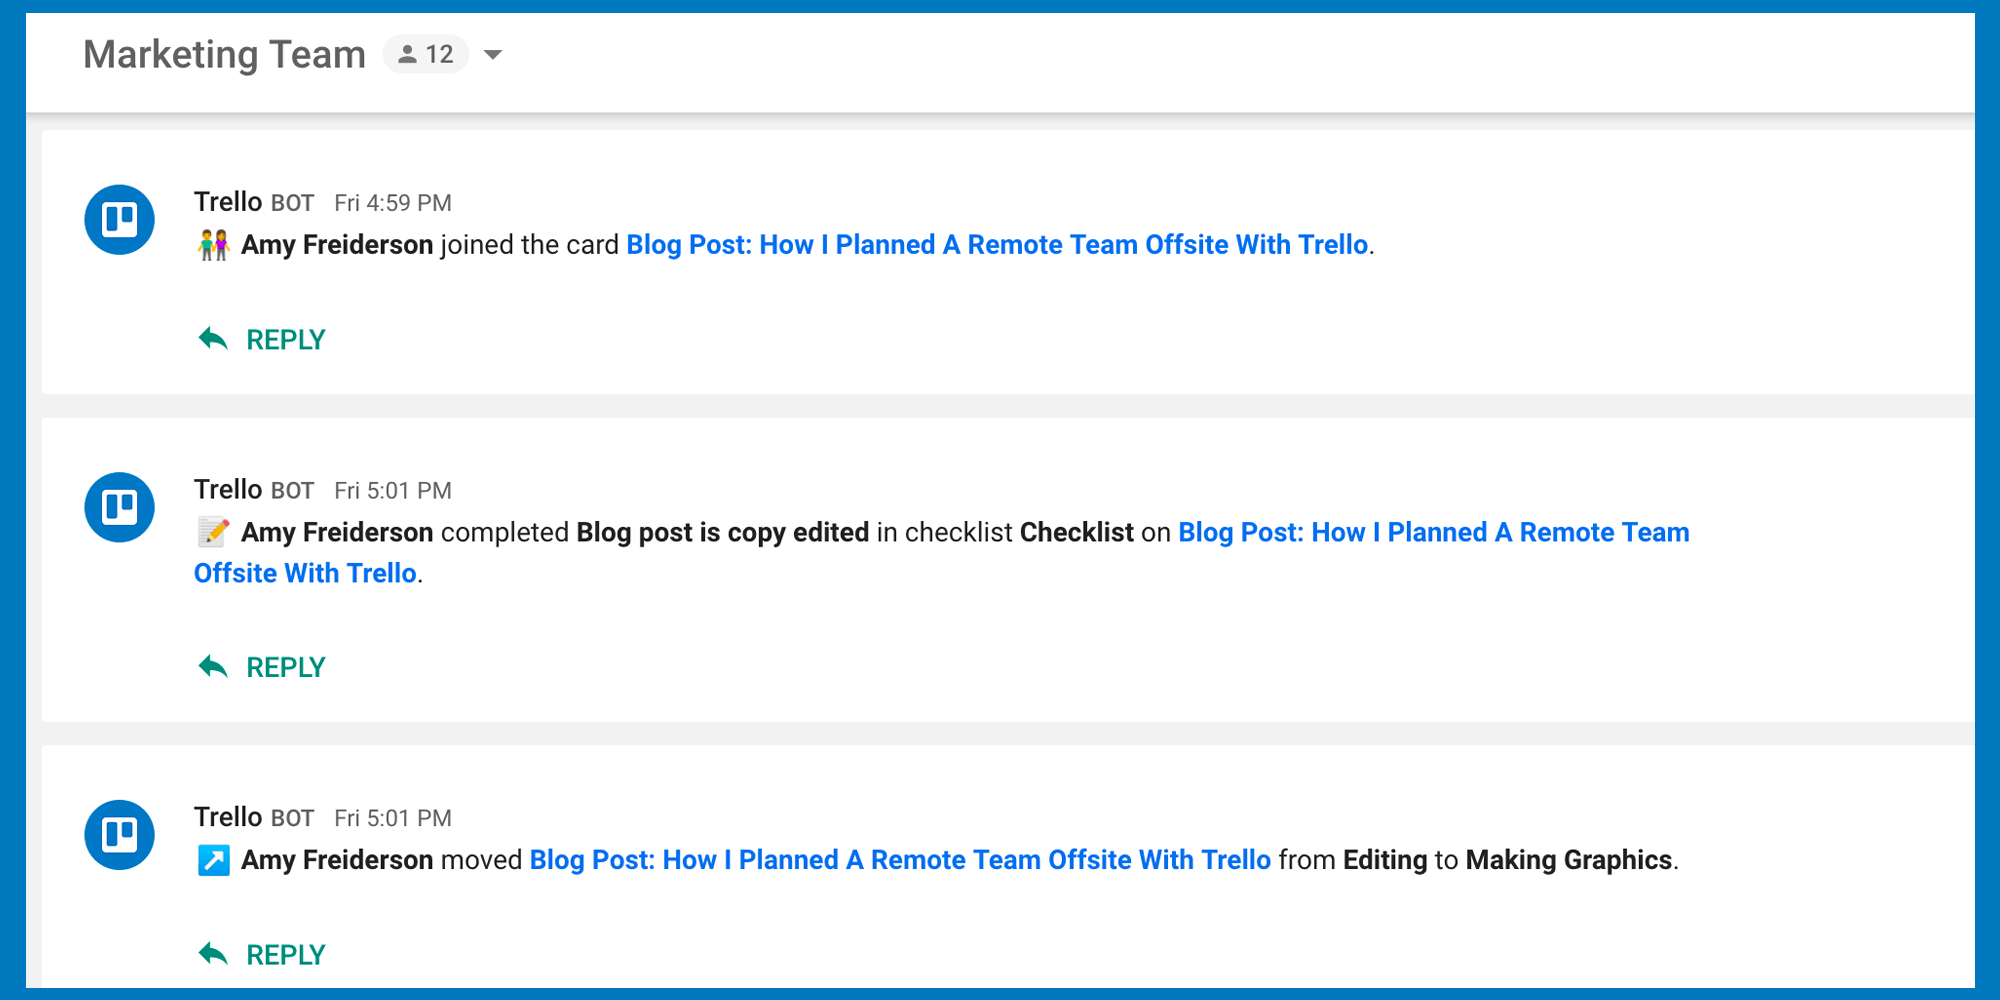 Trello updates in chat tool example